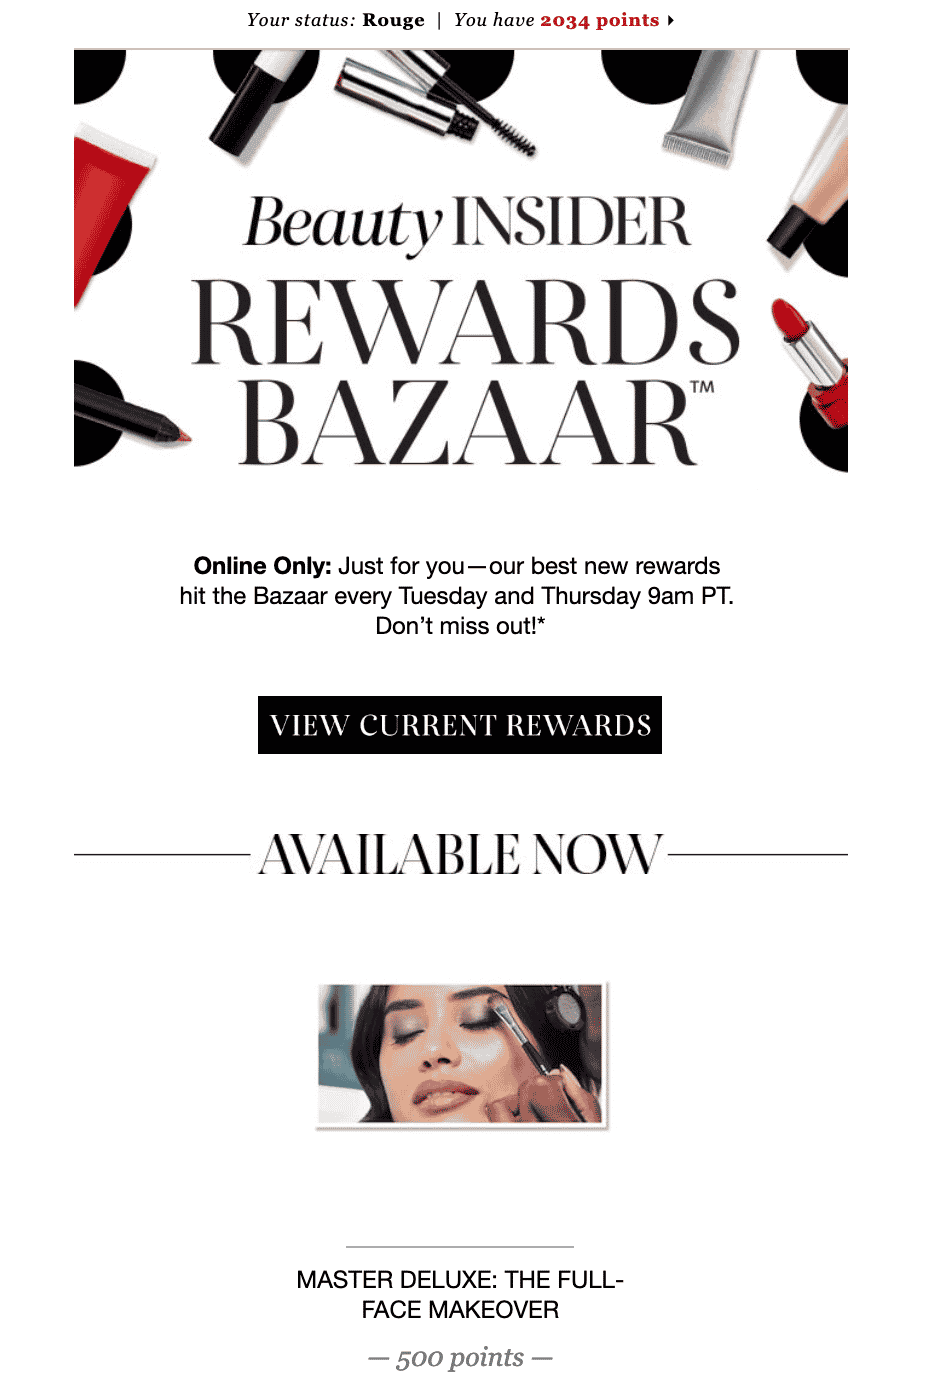 Sephora Increases Revenue from Email Marketing